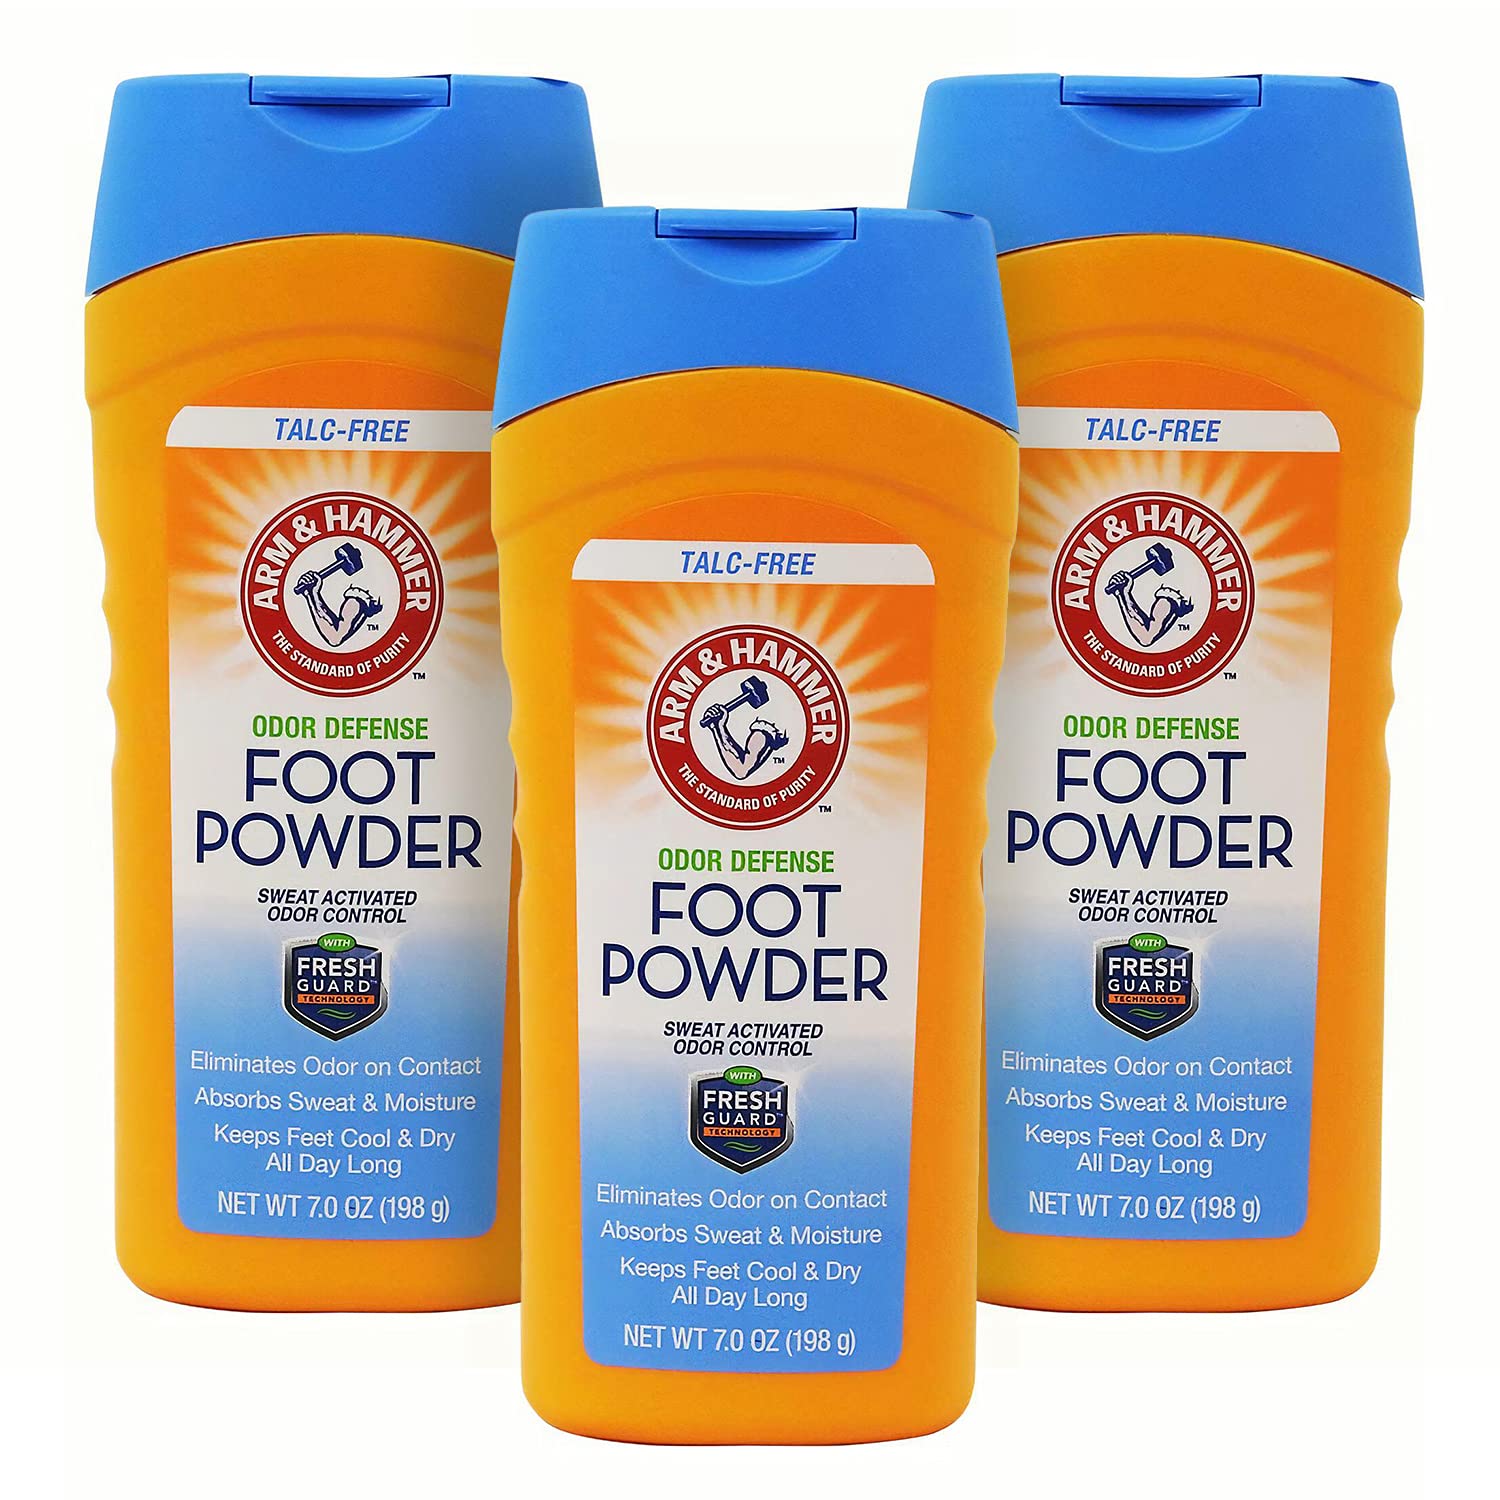 Arm and Hammer Foot Powder for Shoes & Feet, Talc-Free [...]